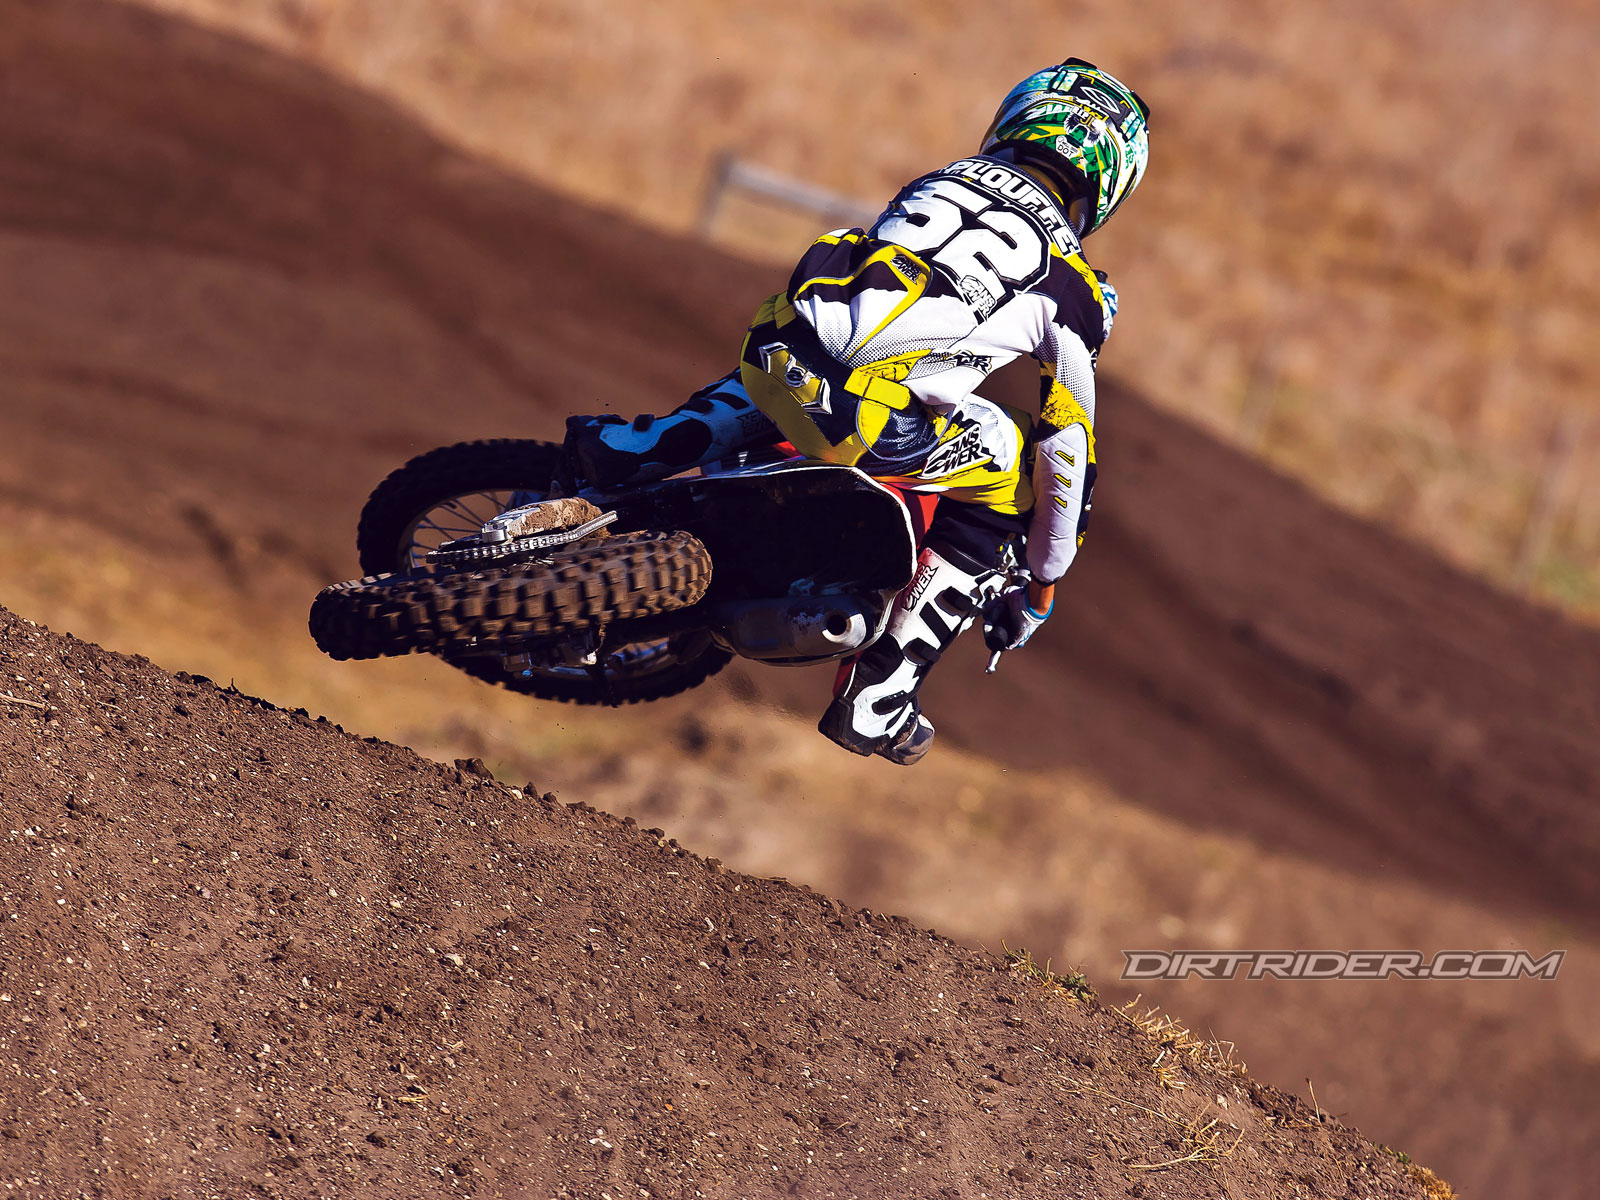 Dirt bike wallpapers Clickandseeworld is all about Funny